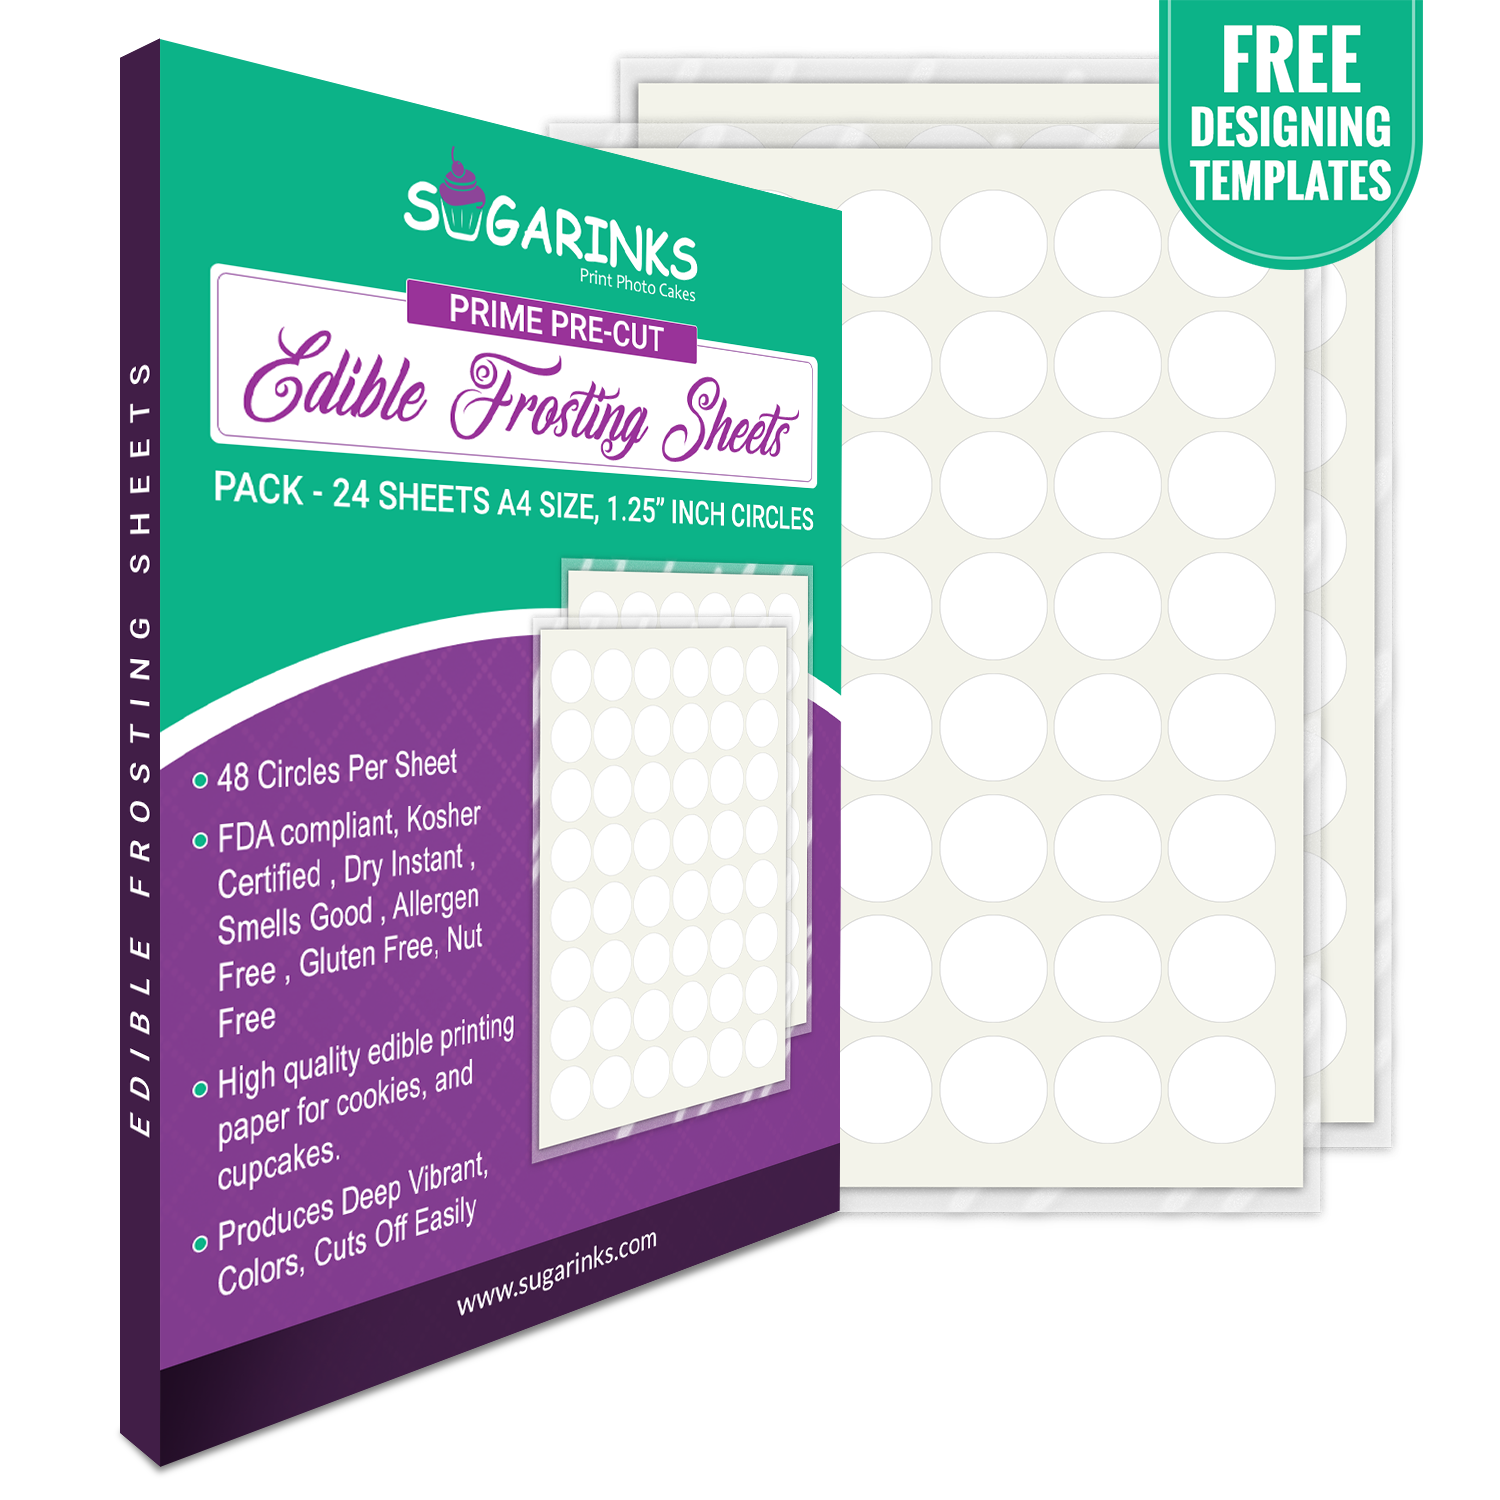 Sugarinks Premium Quality Pre-Cut Circles Frosting Sheets (1.25 inches, 48 Circles) - A4 Size, Pack of 24